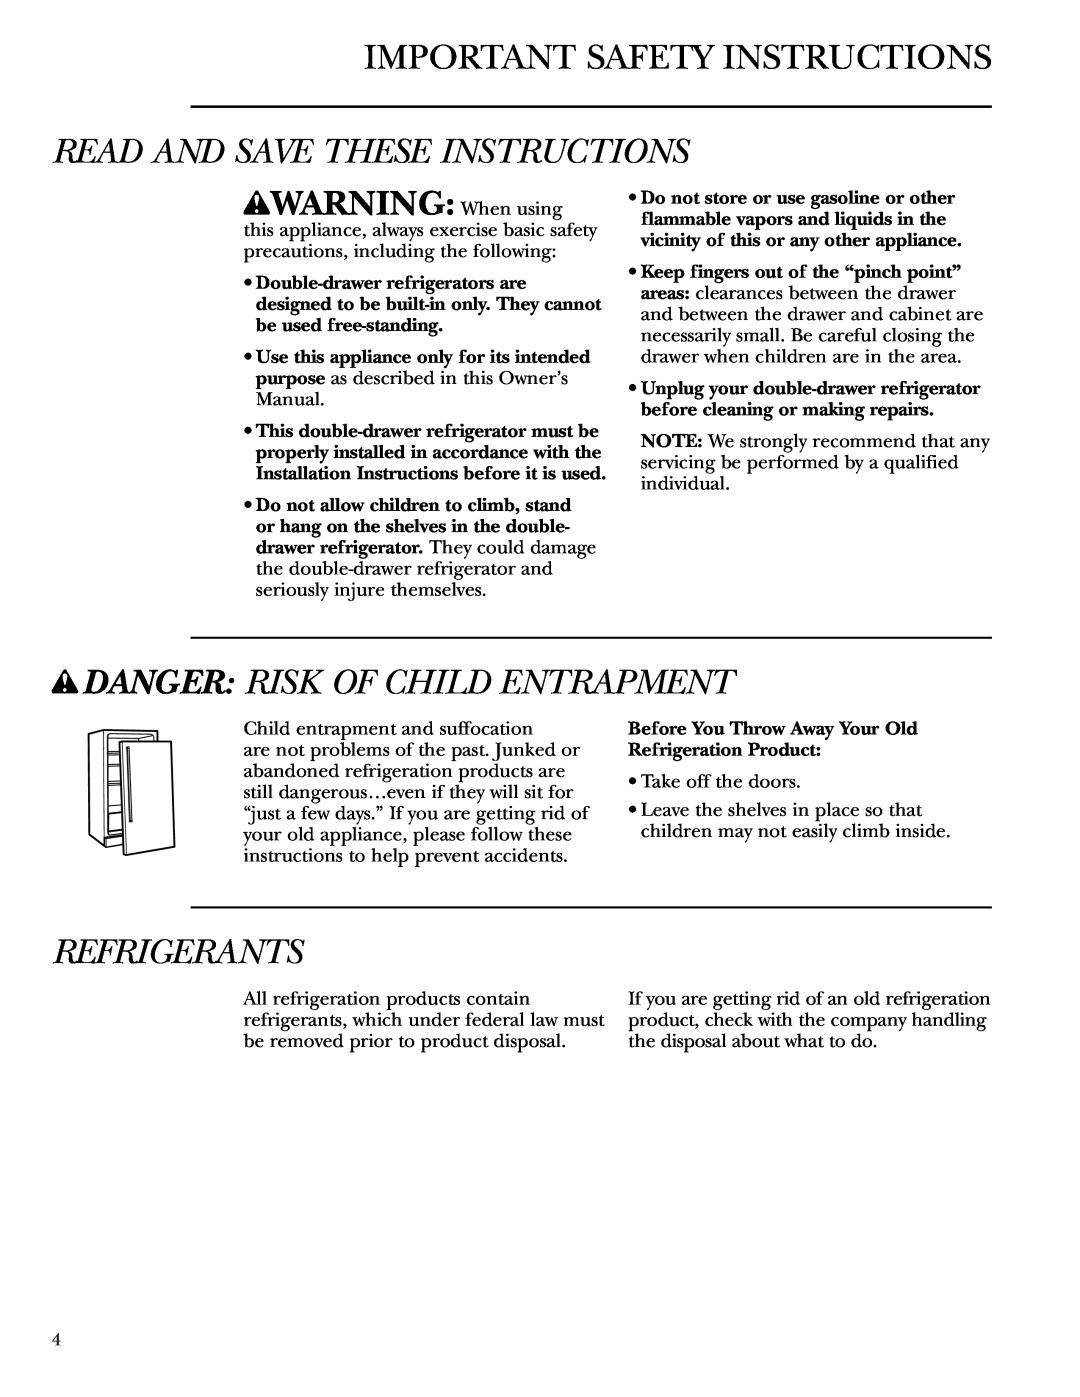 GE Monogram ZIDI240 Important Safety Instructions, Read And Save These Instructions, w DANGER RISK OF CHILD ENTRAPMENT 